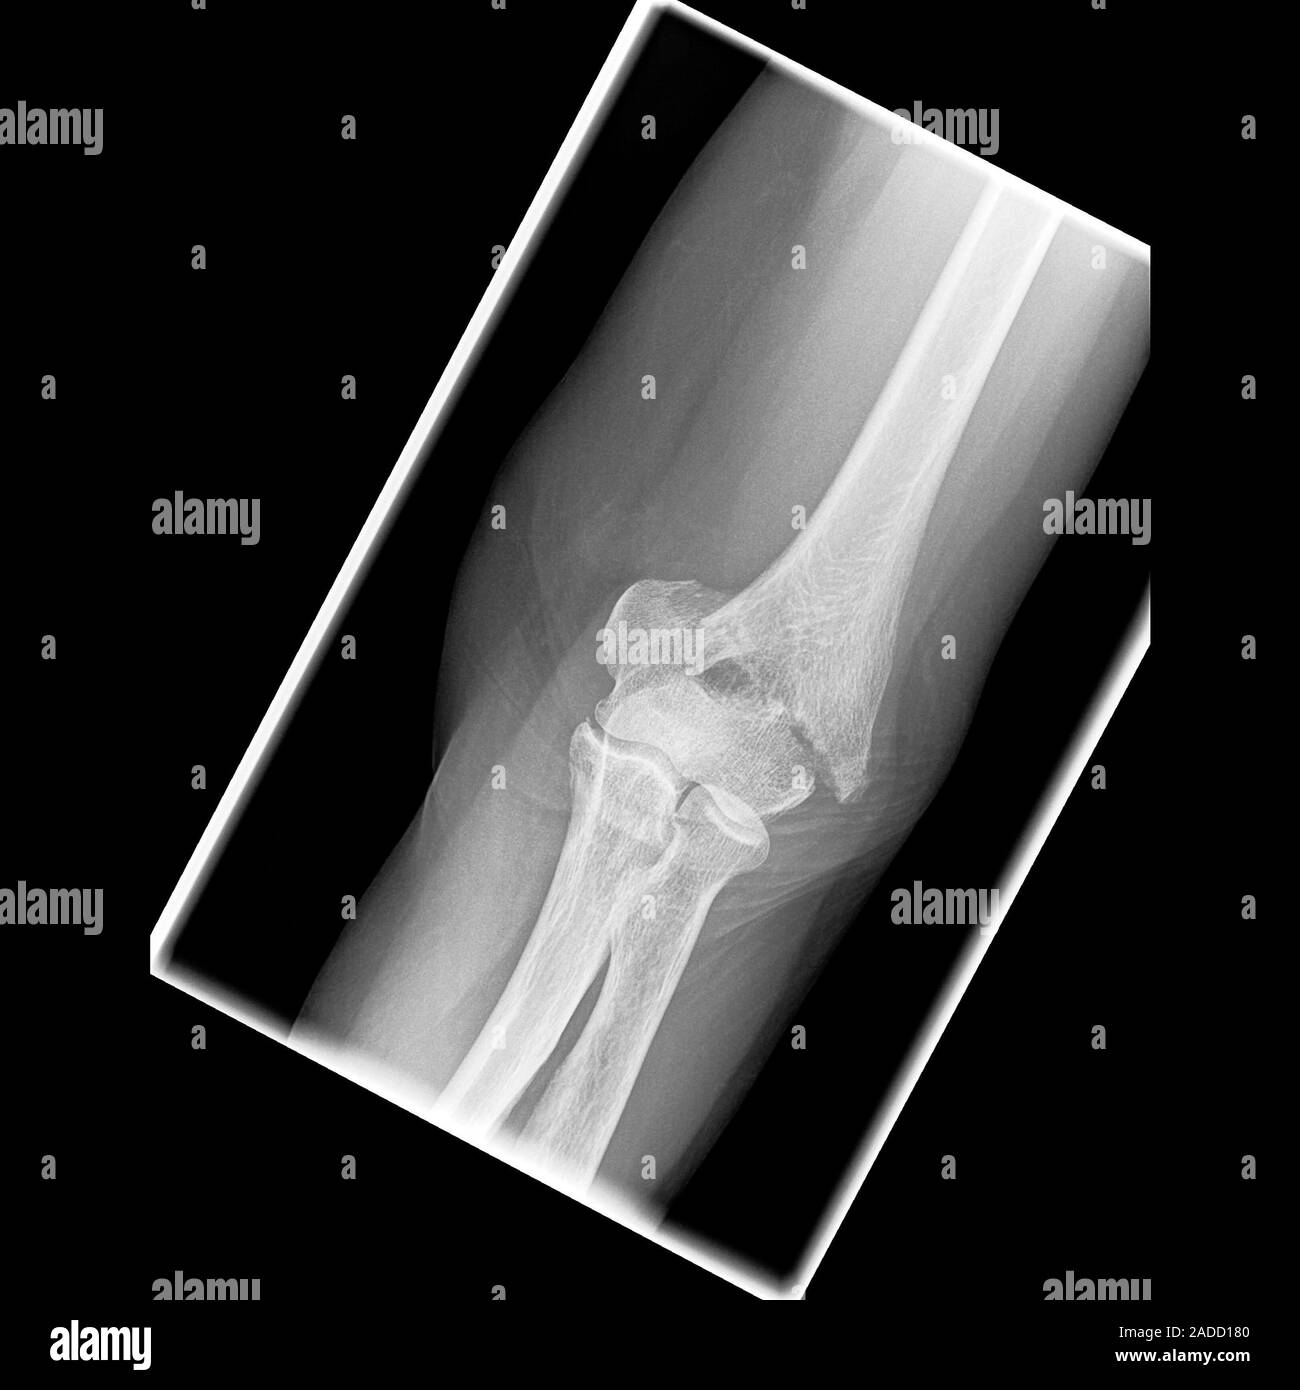 Elbow Fracture X Ray Of The Elbow Of A 75 Year Old Woman With An Elbow Effusion Fluid On The 6556